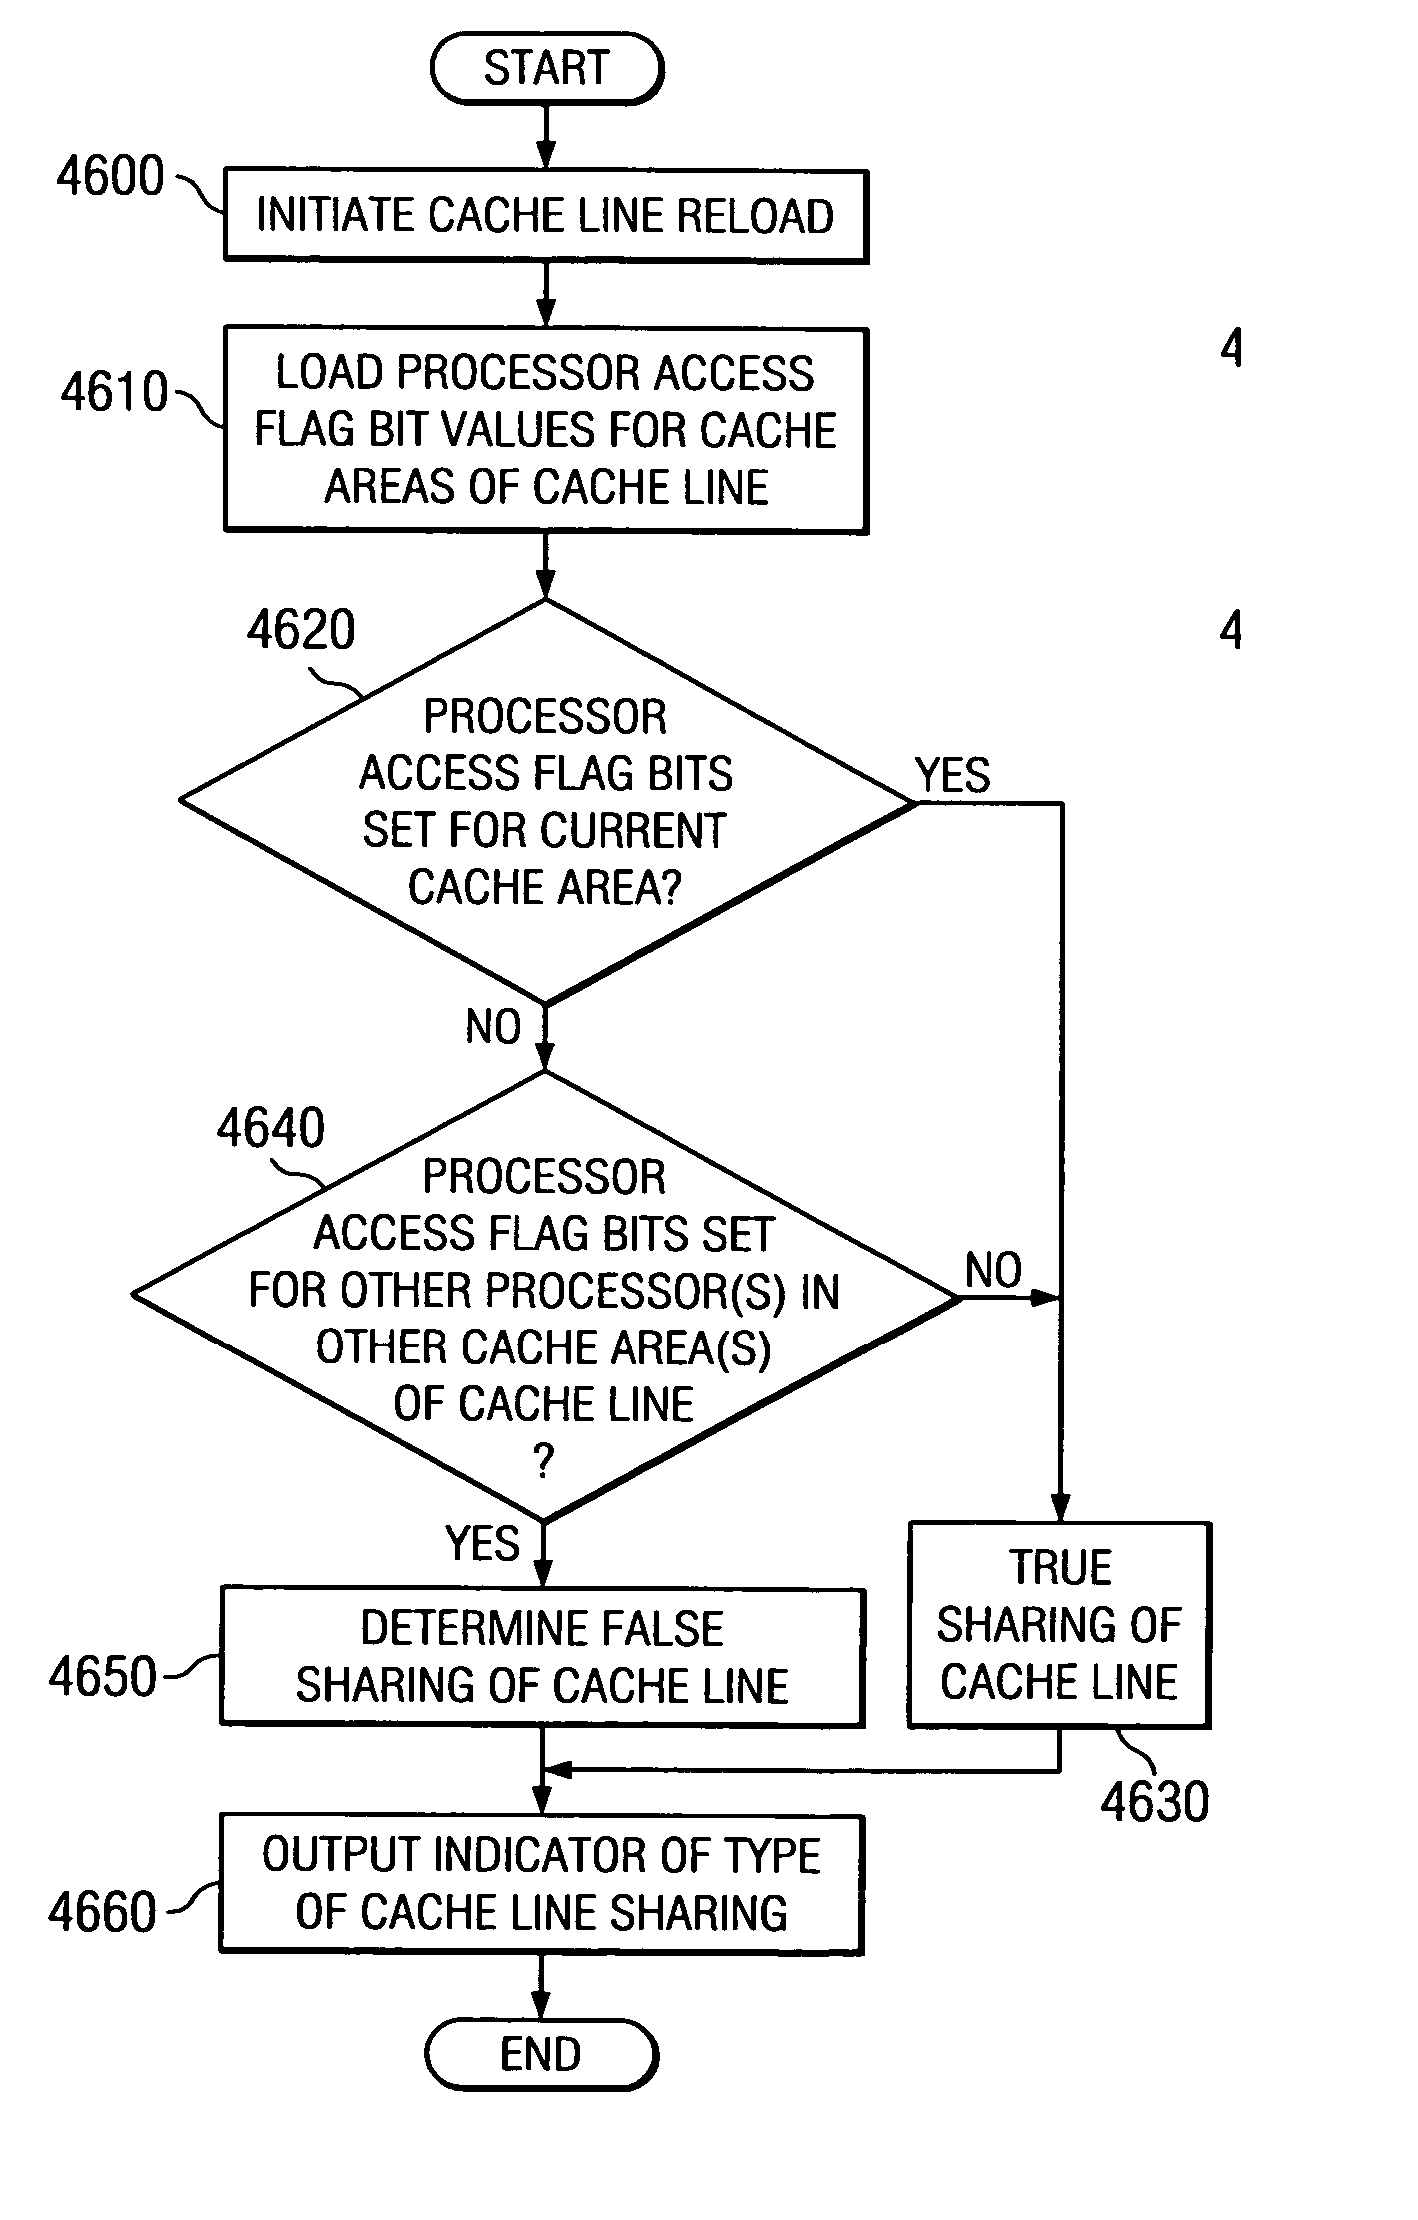 Method and apparatus for identifying false cache line sharing